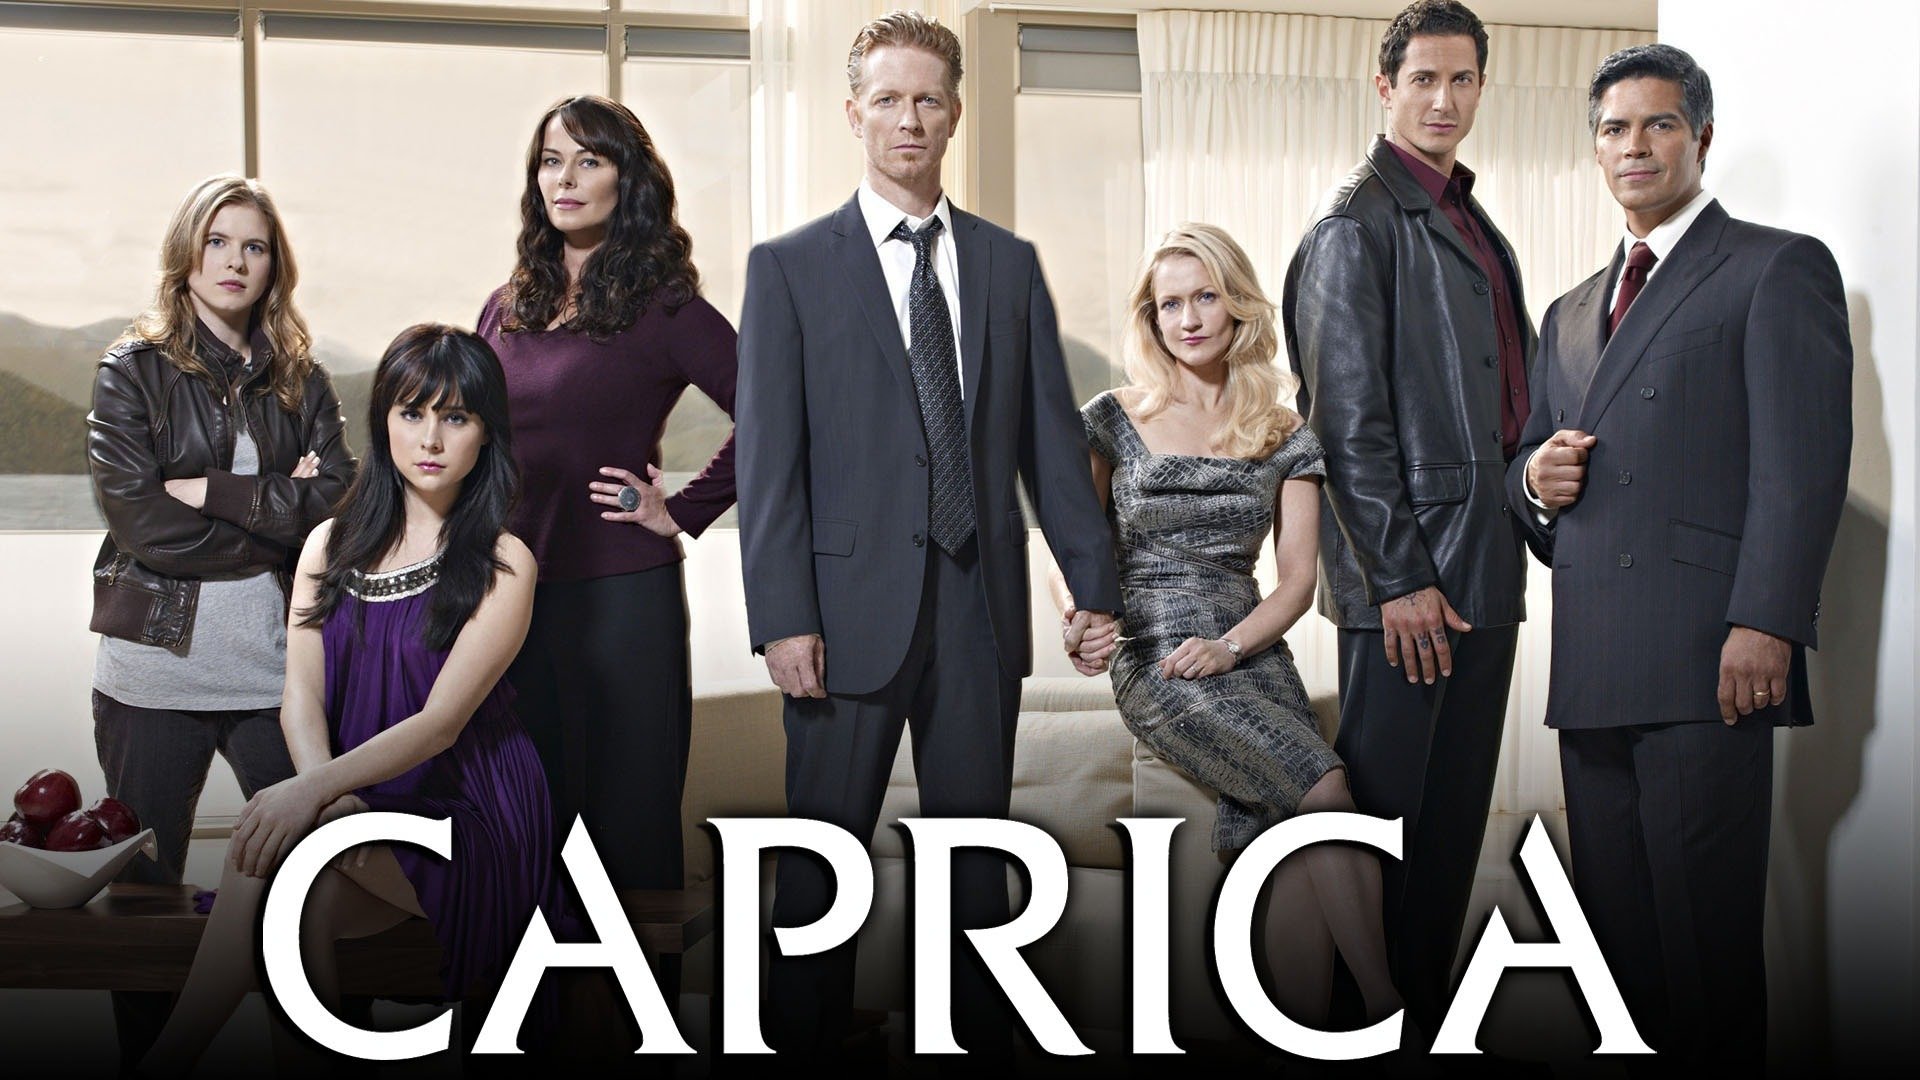 Jammer's Blog » Closing thoughts on 'Caprica'